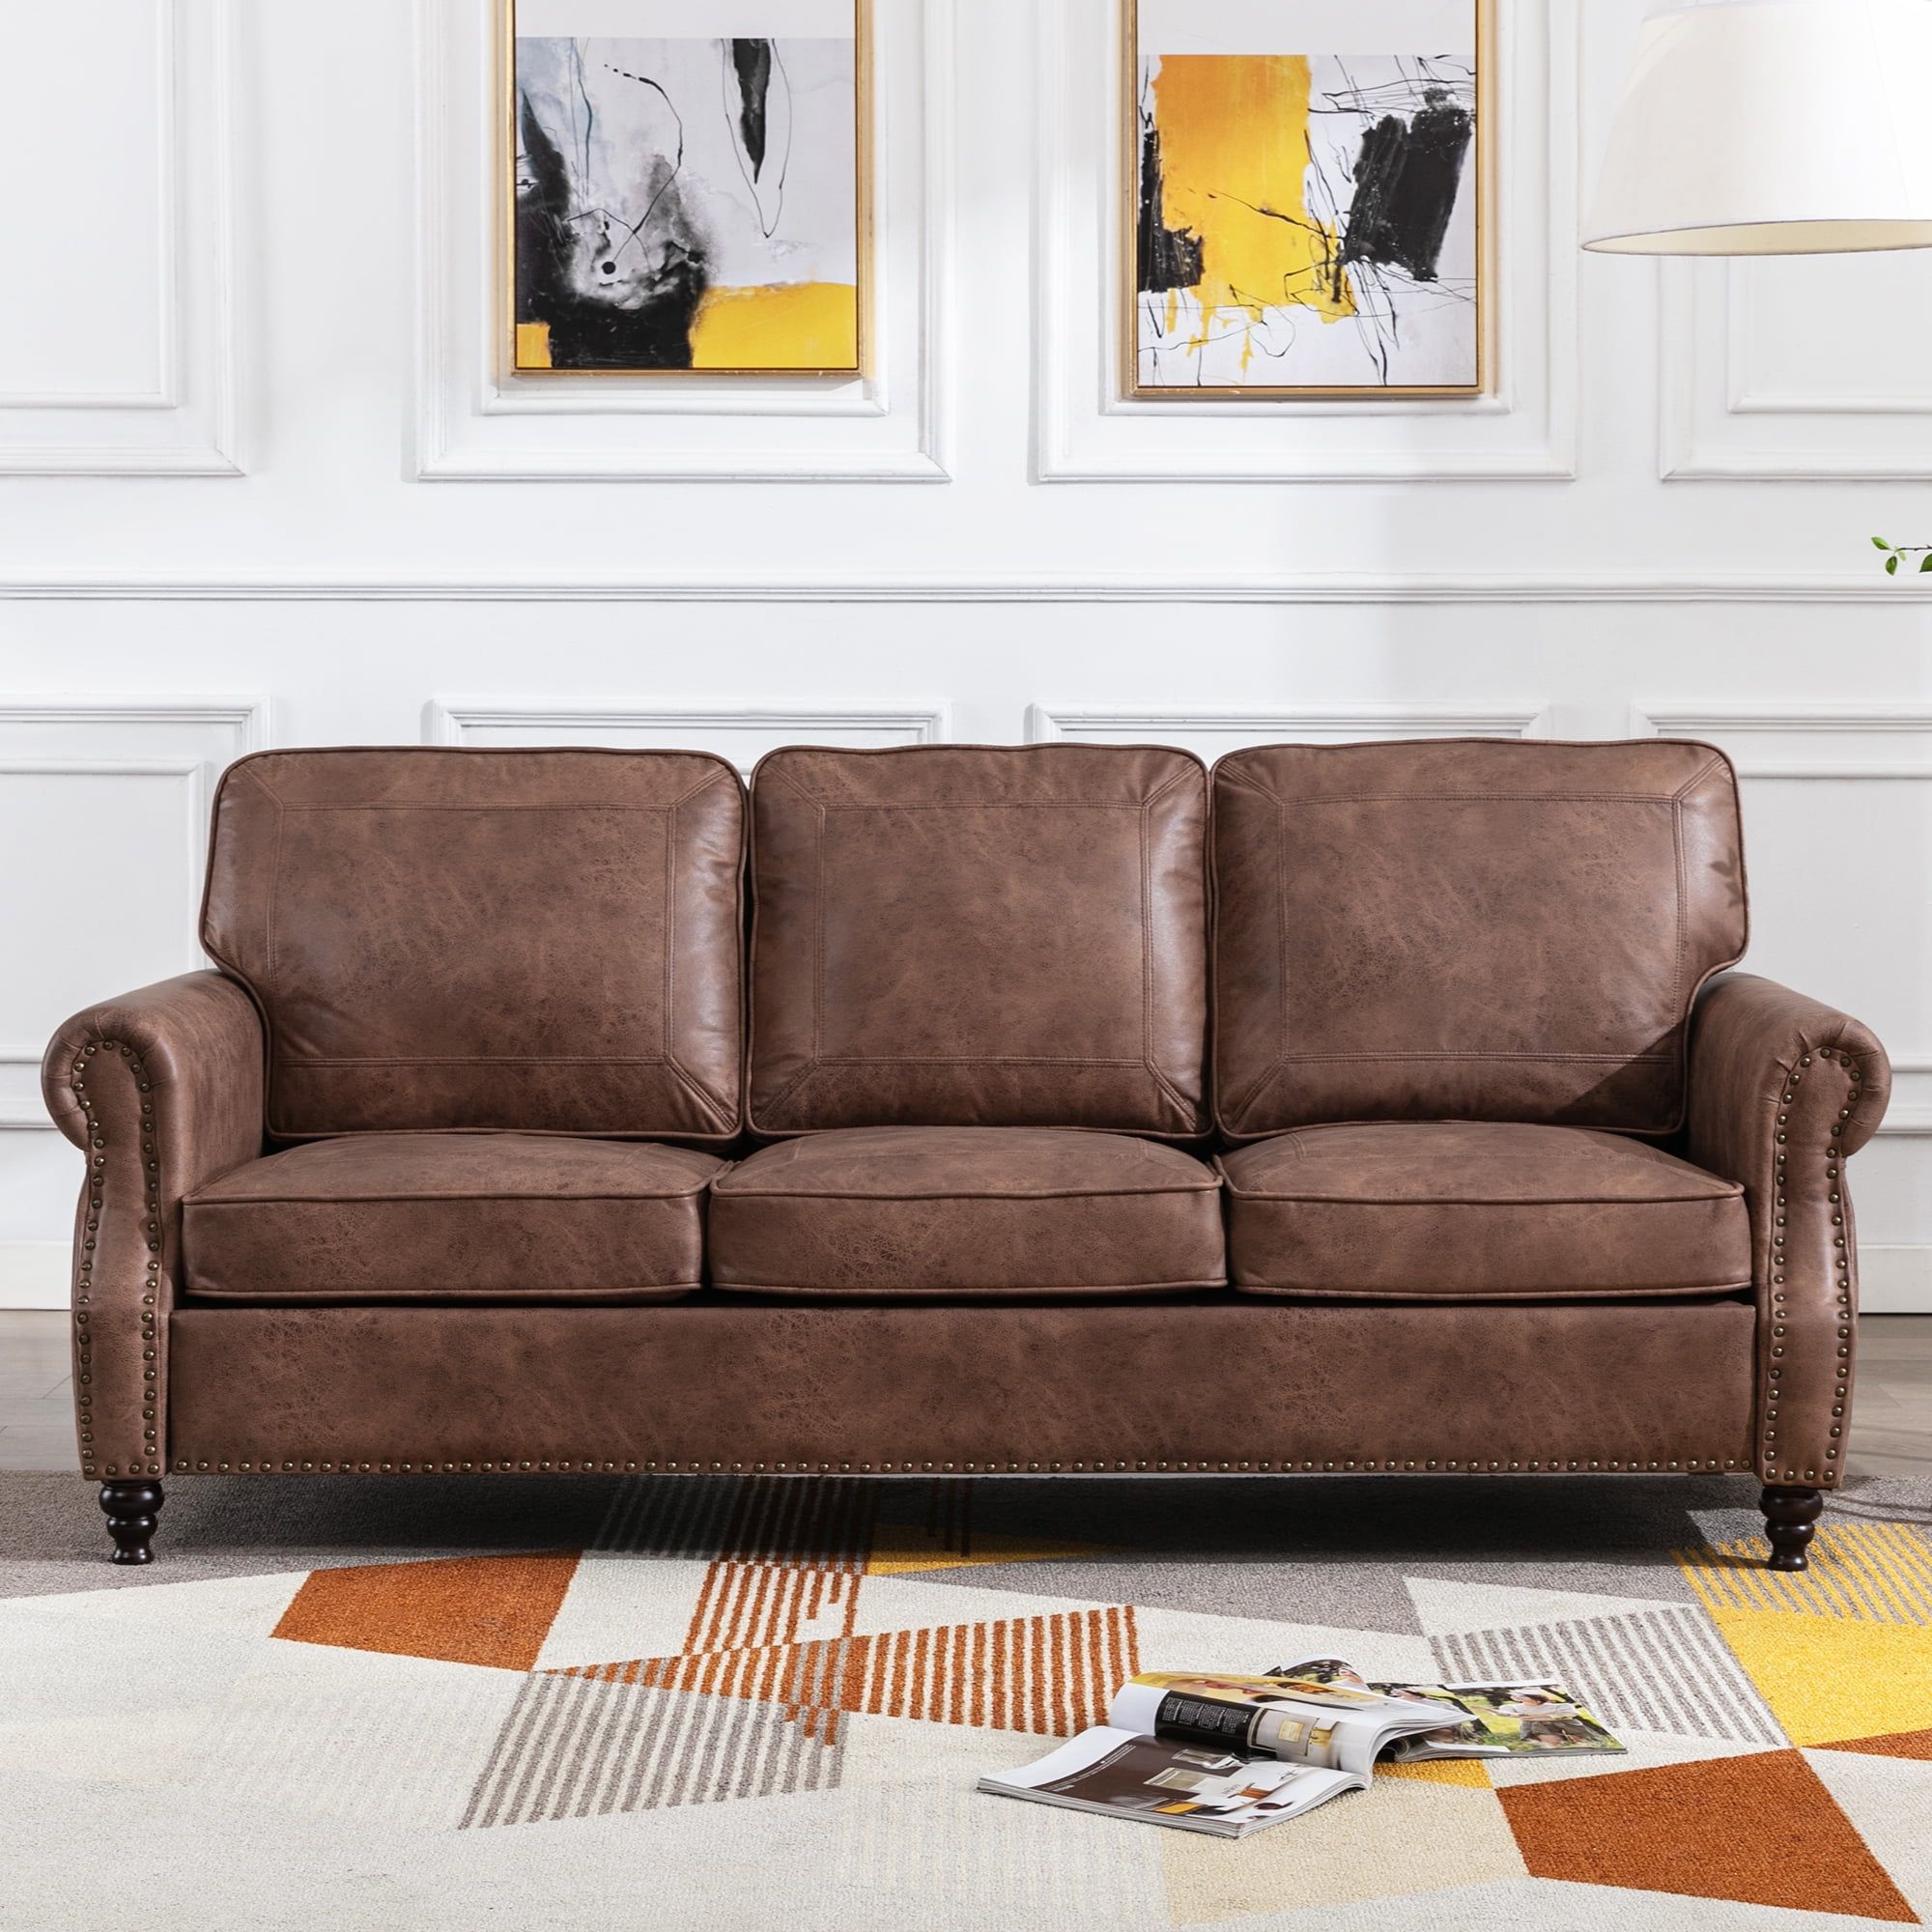 Featured Photo of The 15 Best Collection of Faux Leather Sofas in Chocolate Brown